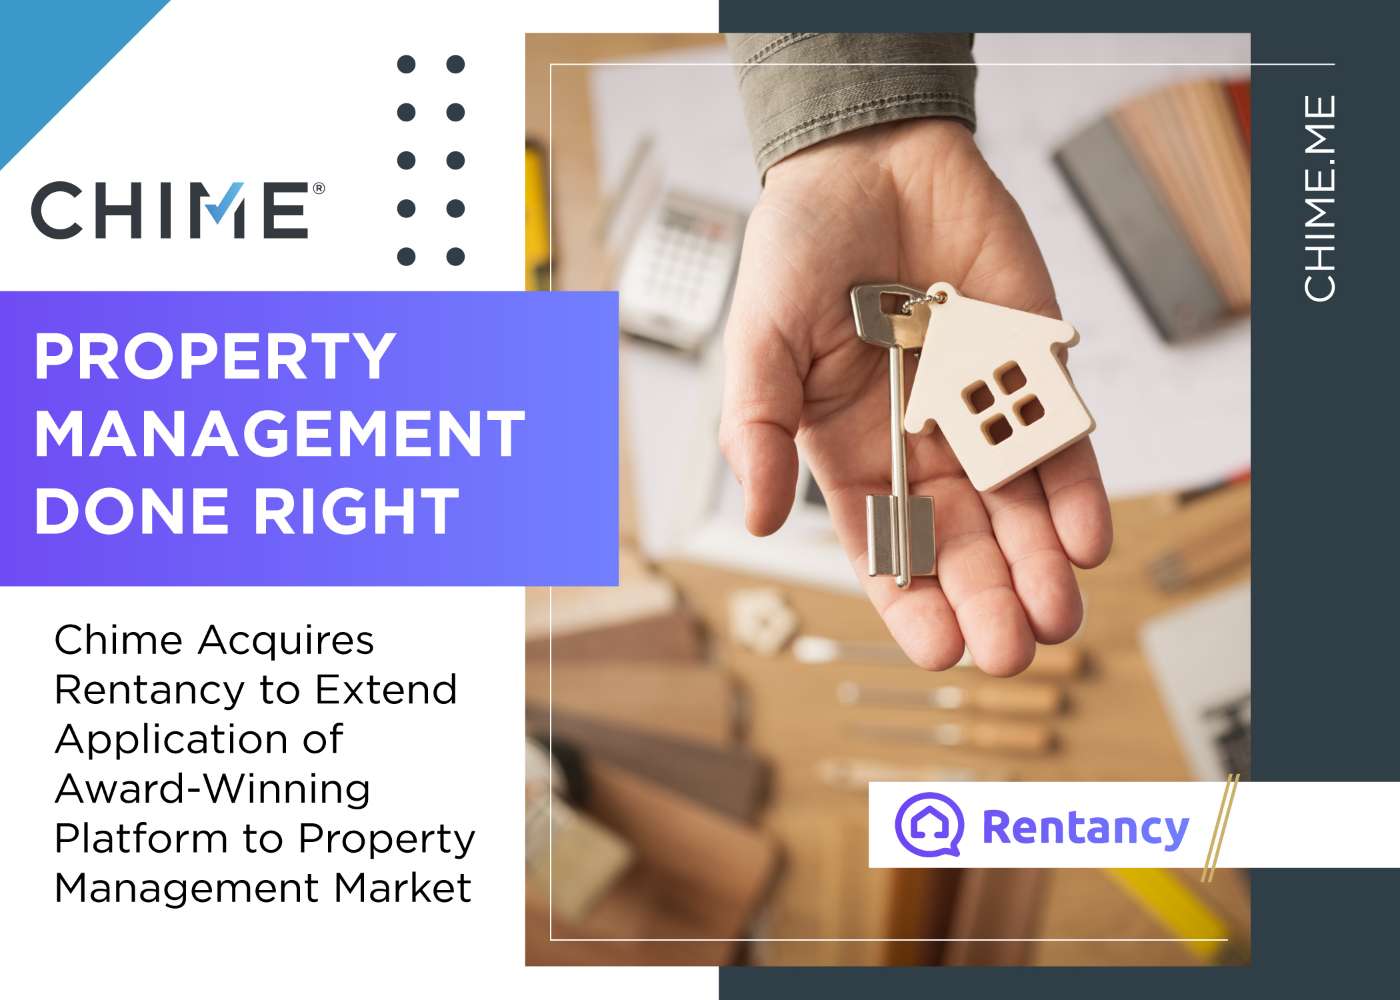 chime acquires rentancy